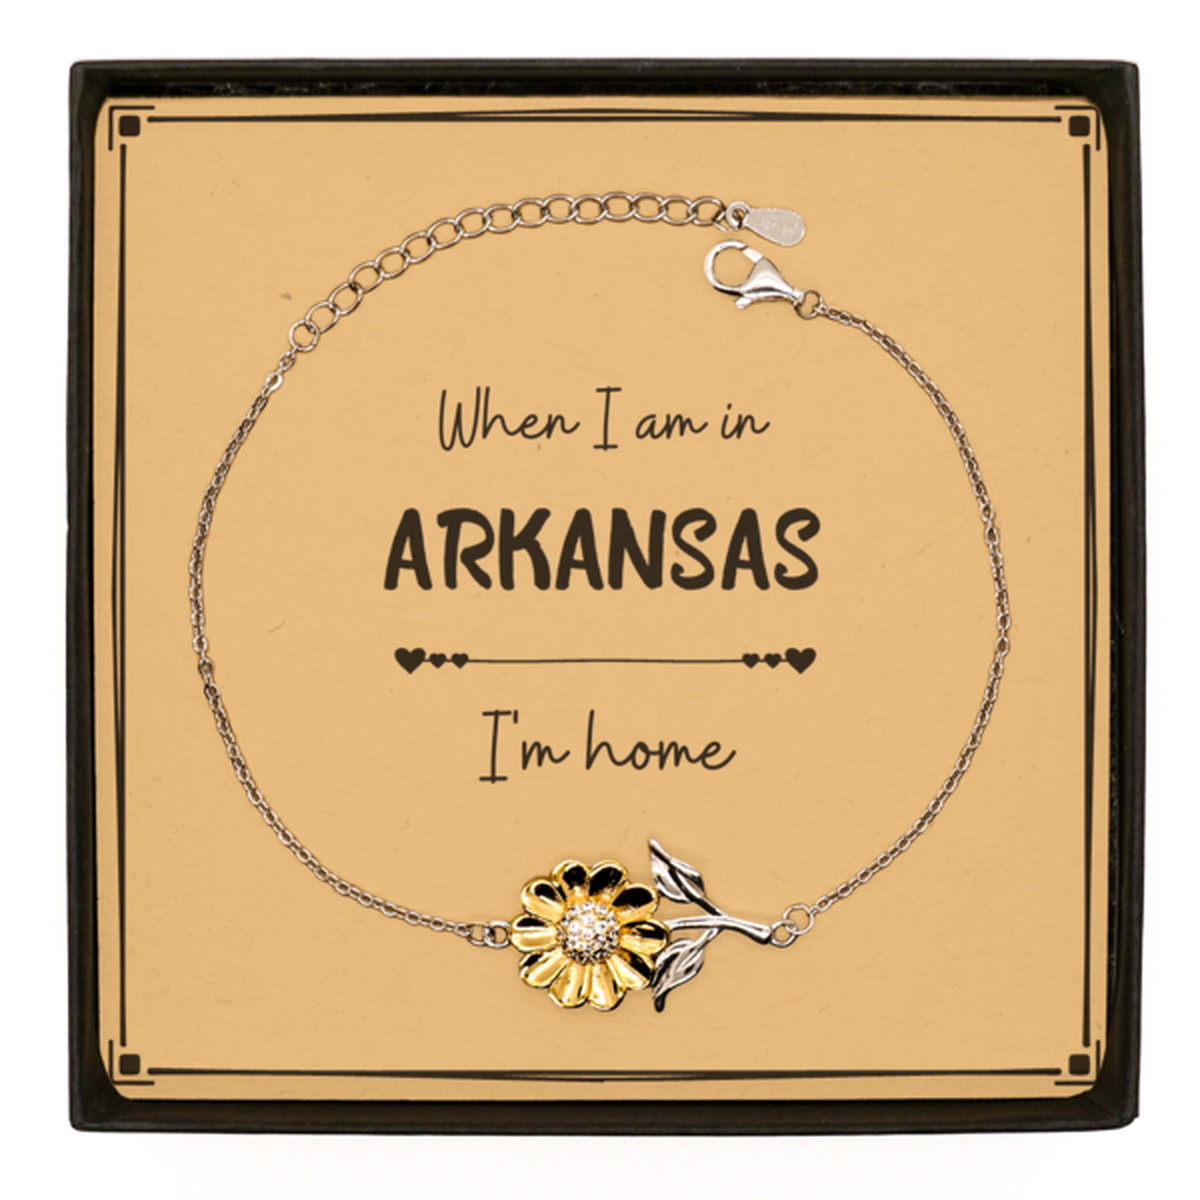 When I am in Arkansas I'm home Sunflower Bracelet, Message Card Gifts For Arkansas, State Arkansas Birthday Gifts for Friends Coworker